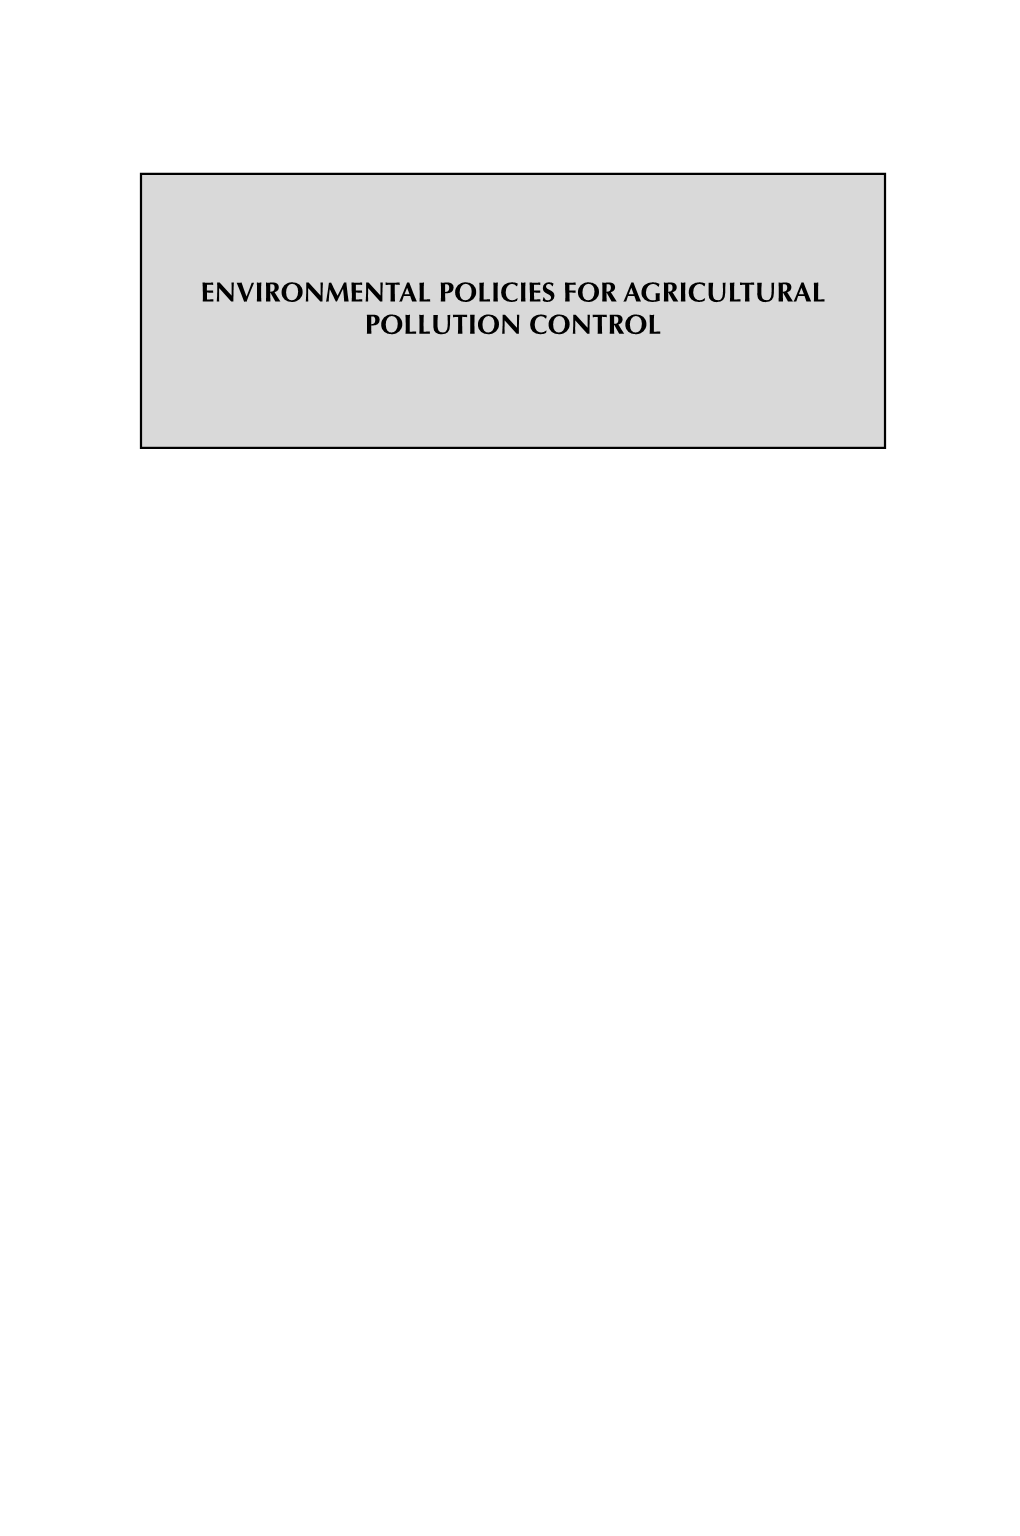 ENVIRONMENTAL POLICIES for AGRICULTURAL POLLUTION CONTROL 00Environ PRELIMS 3/8/01 2:12 PM Page Iii